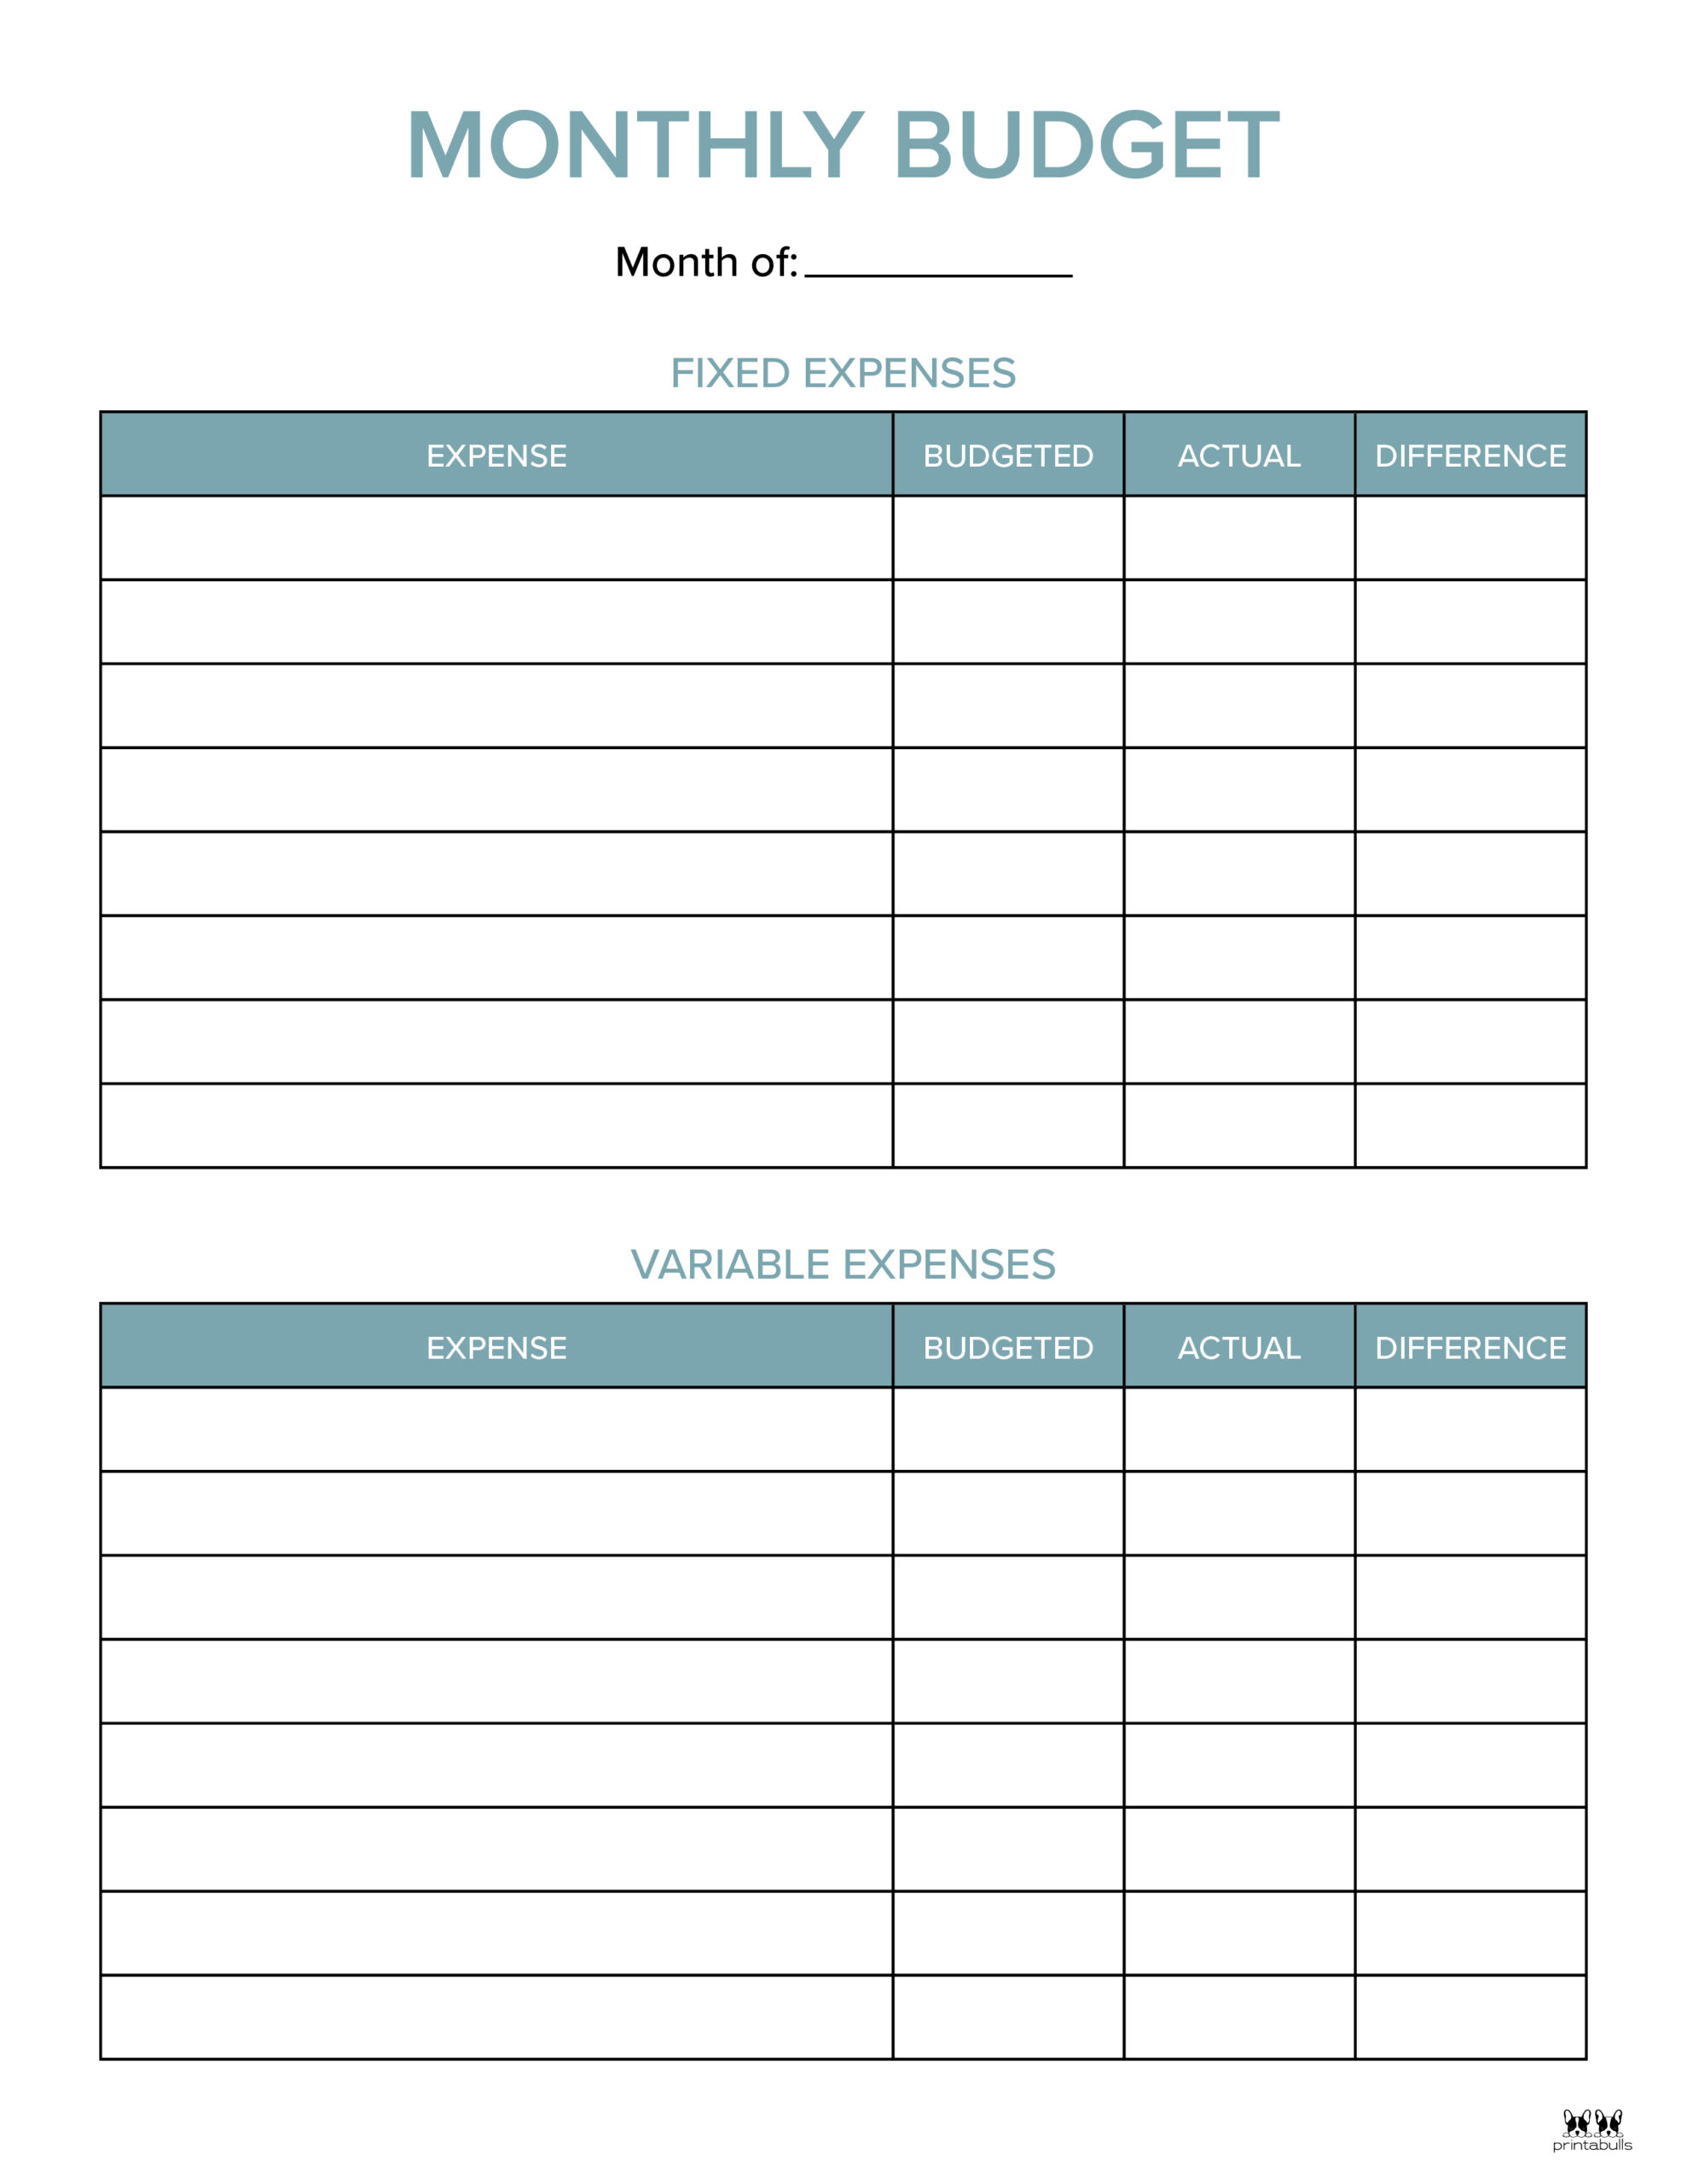 Monthly Budget Planners 20 FREE Printables Printabulls